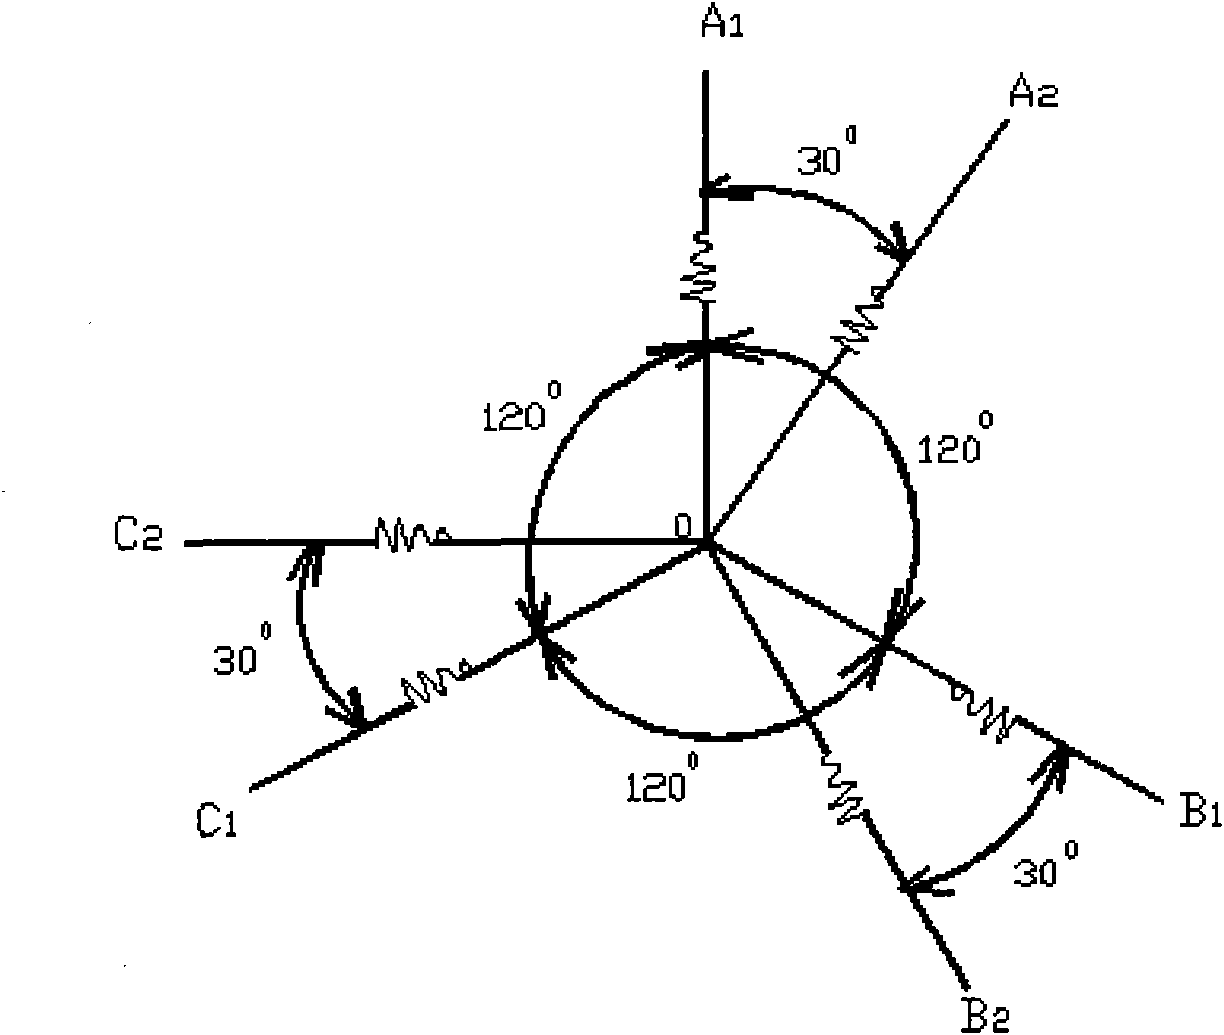 Double-Y-shift 30-degree 6-phase rectifying winding of fractional slot